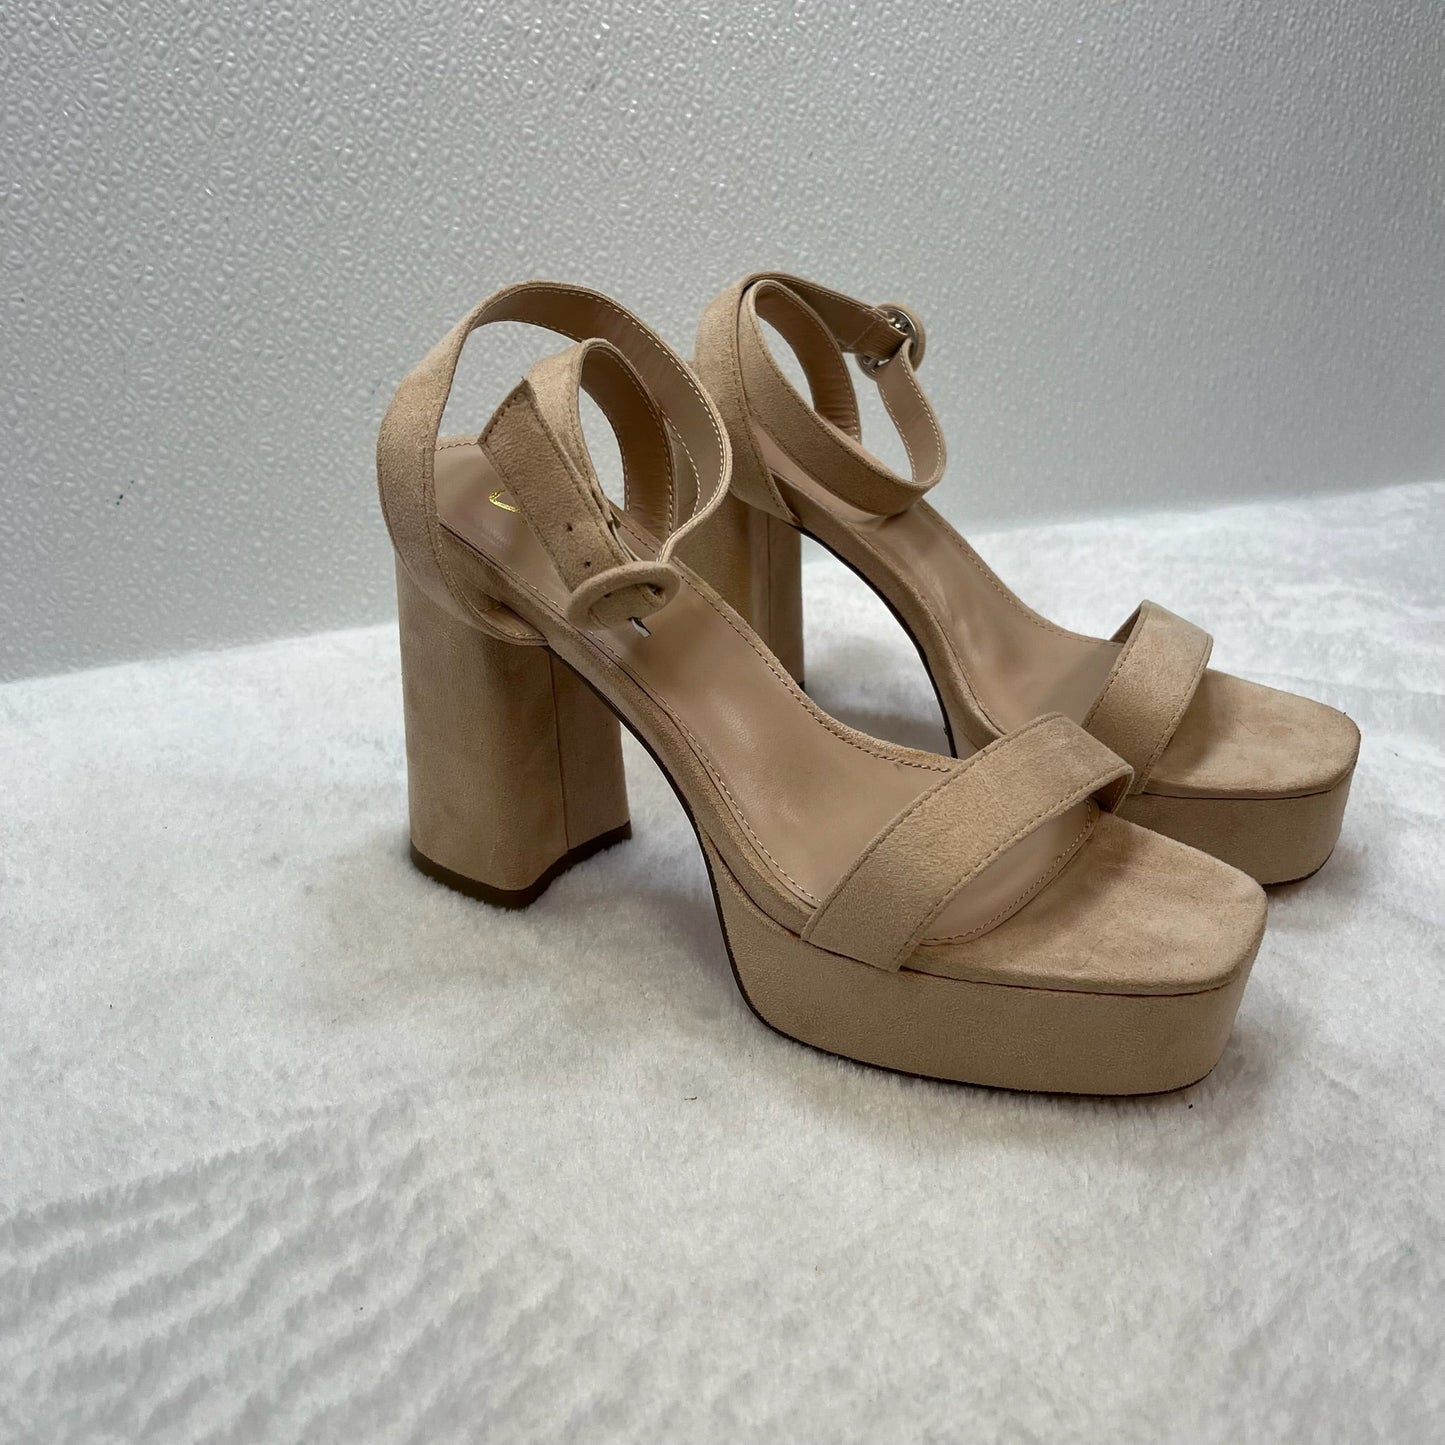 Shoes Heels Block By Lulus  Size: 5.5